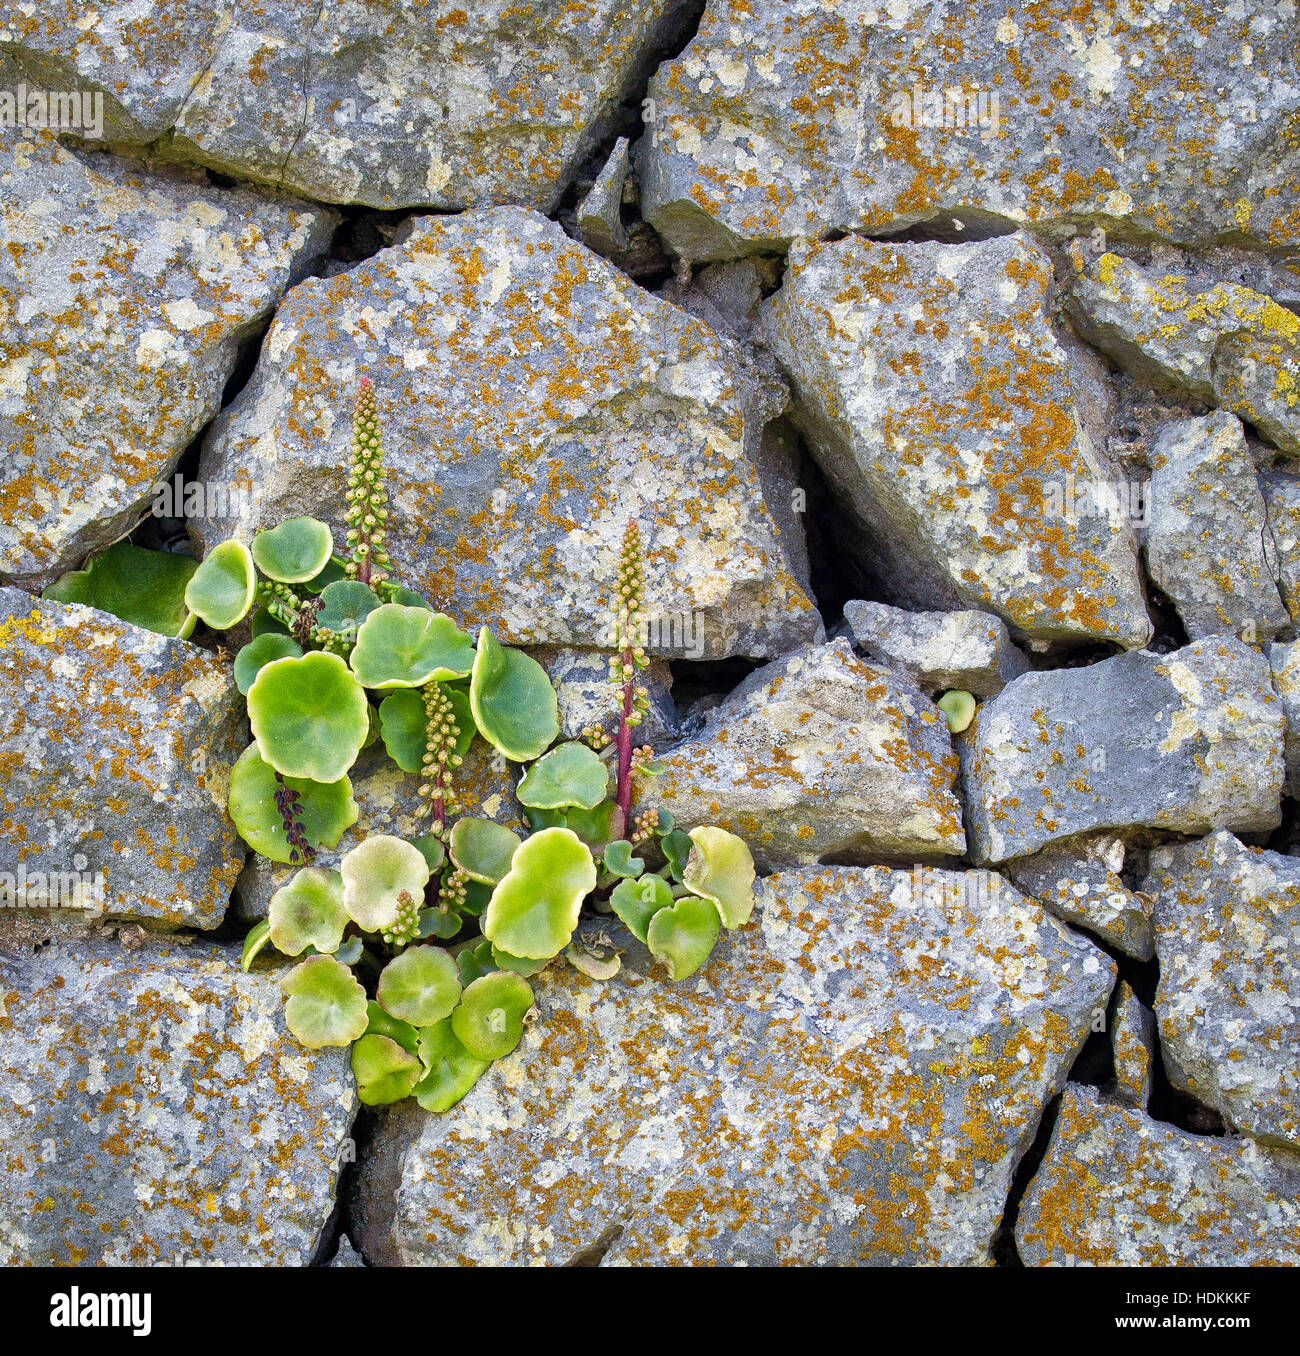 Wall pennywort or navelwort Umbilicus rupestris in typical habitat in the crevices of old stone walls on the Gower peninsula Stock Photo